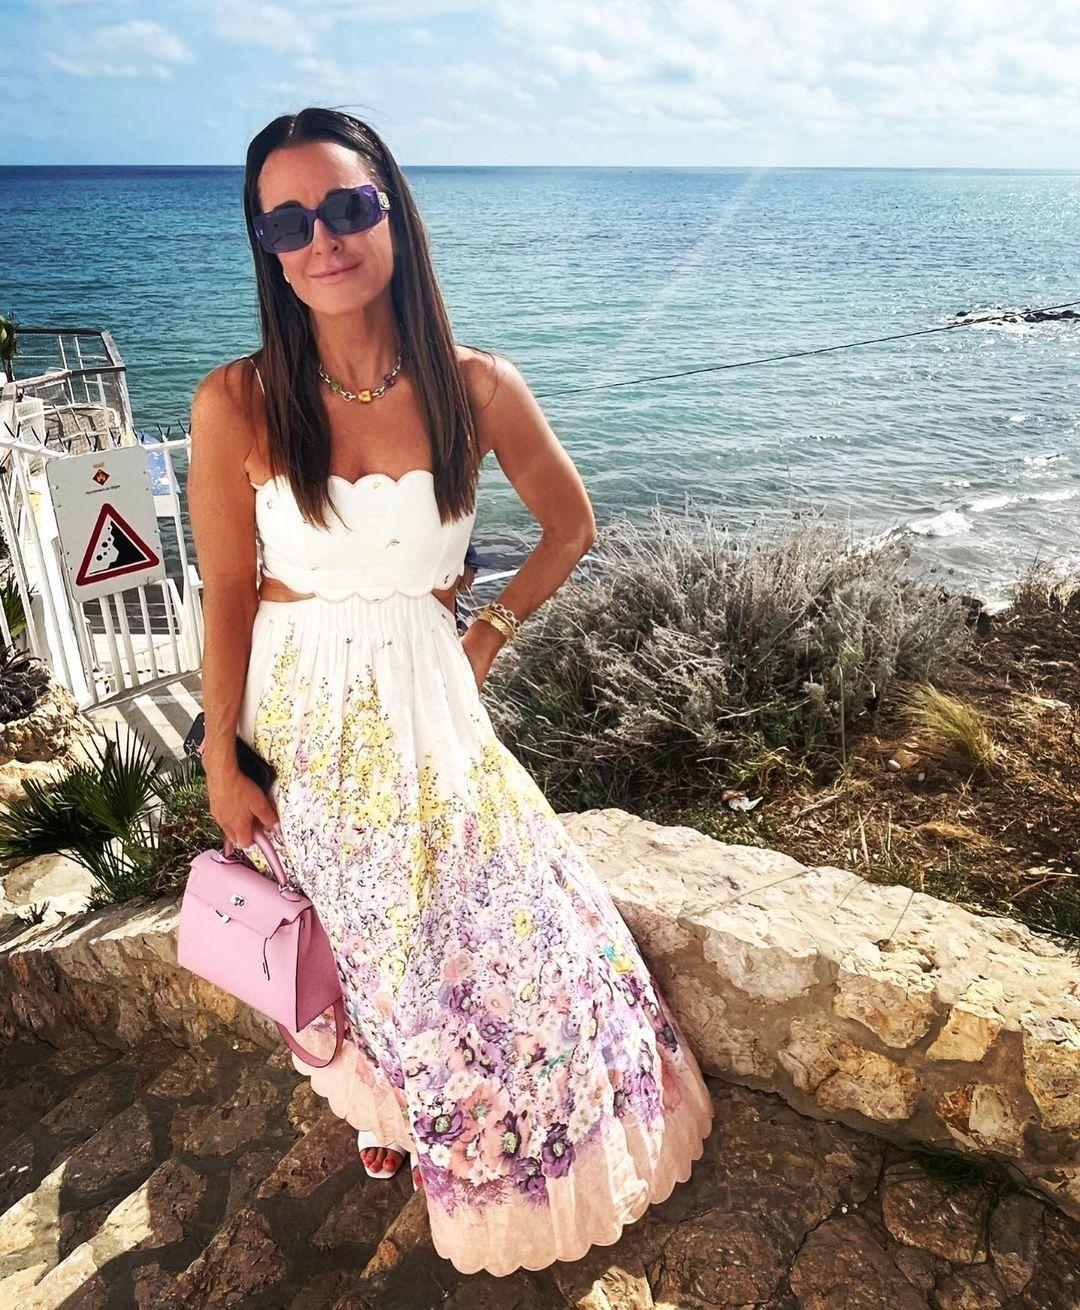 Kyle Richards Is 'Taking It All In' With THIS Stunning Summer Dress